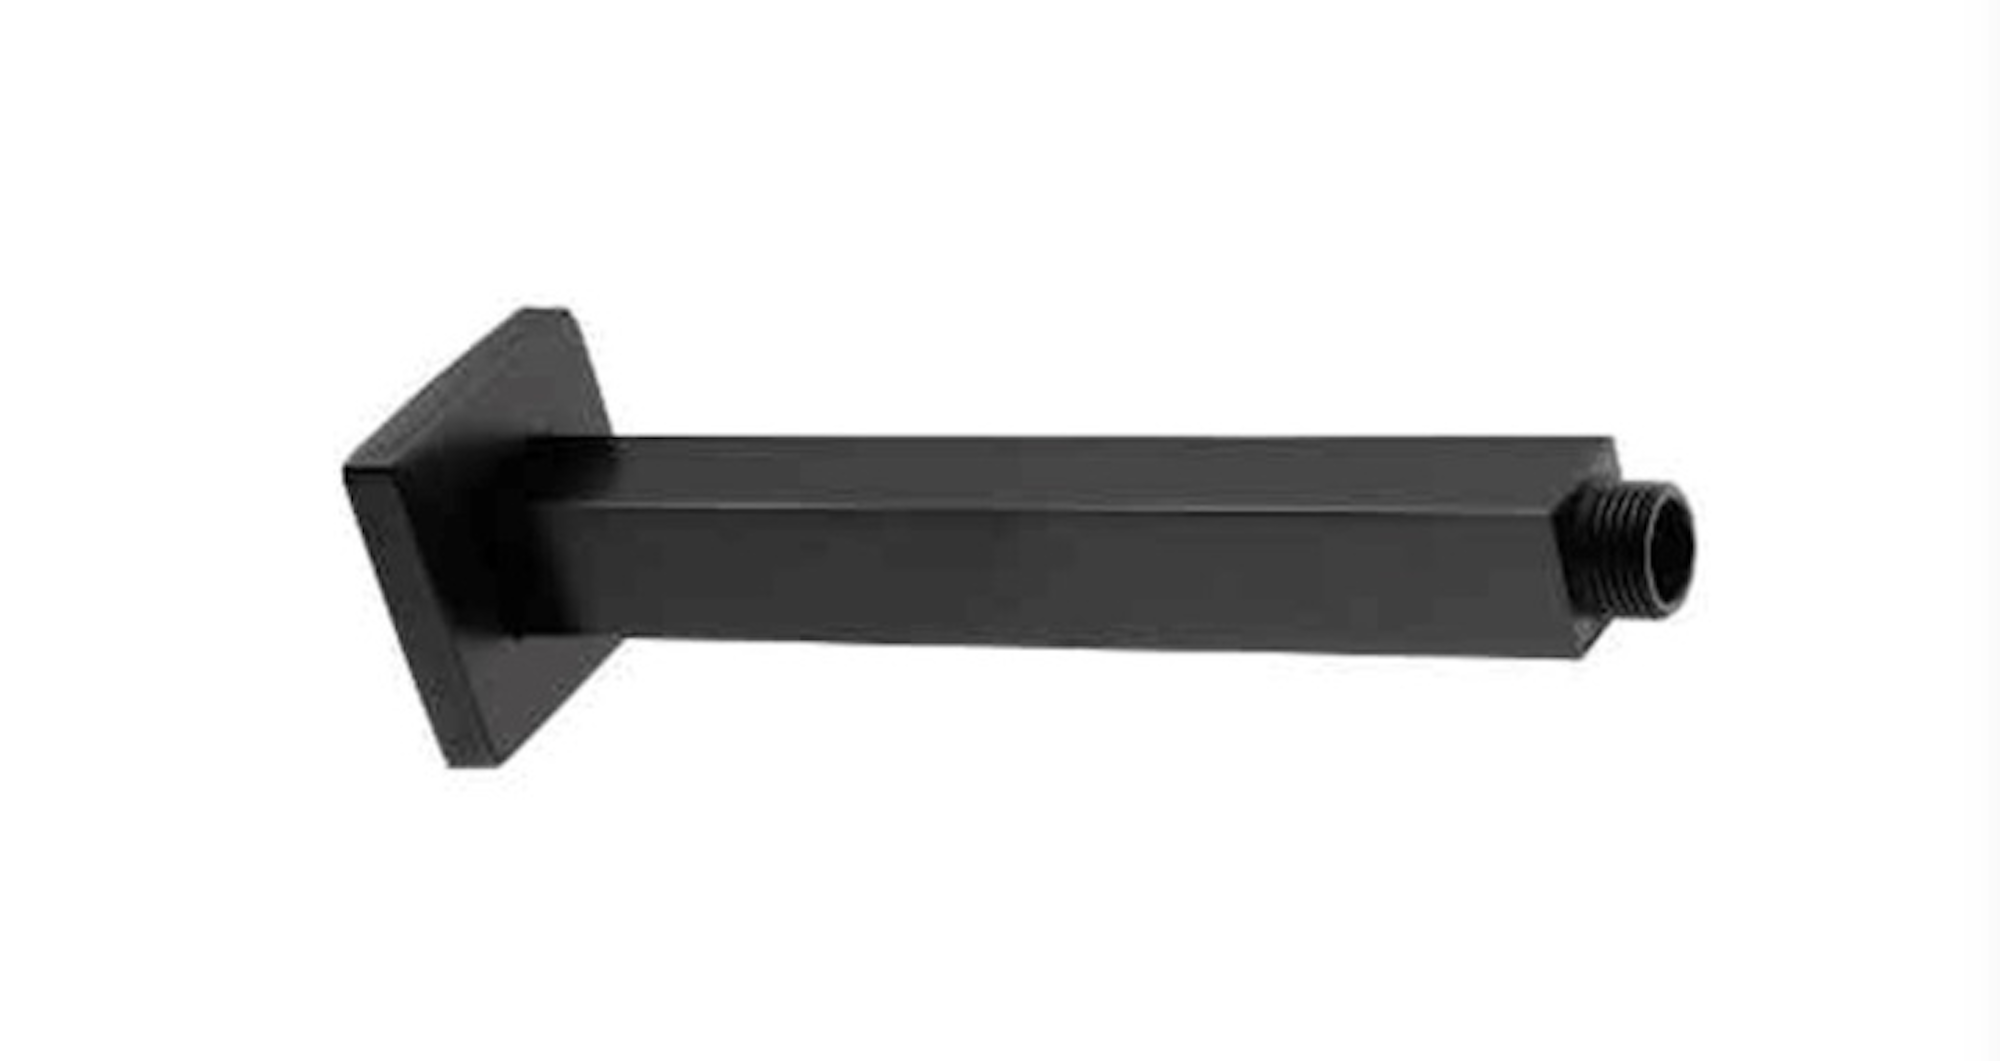 TOOGA 100mm square ceiling mounted shower arm - Matte Black